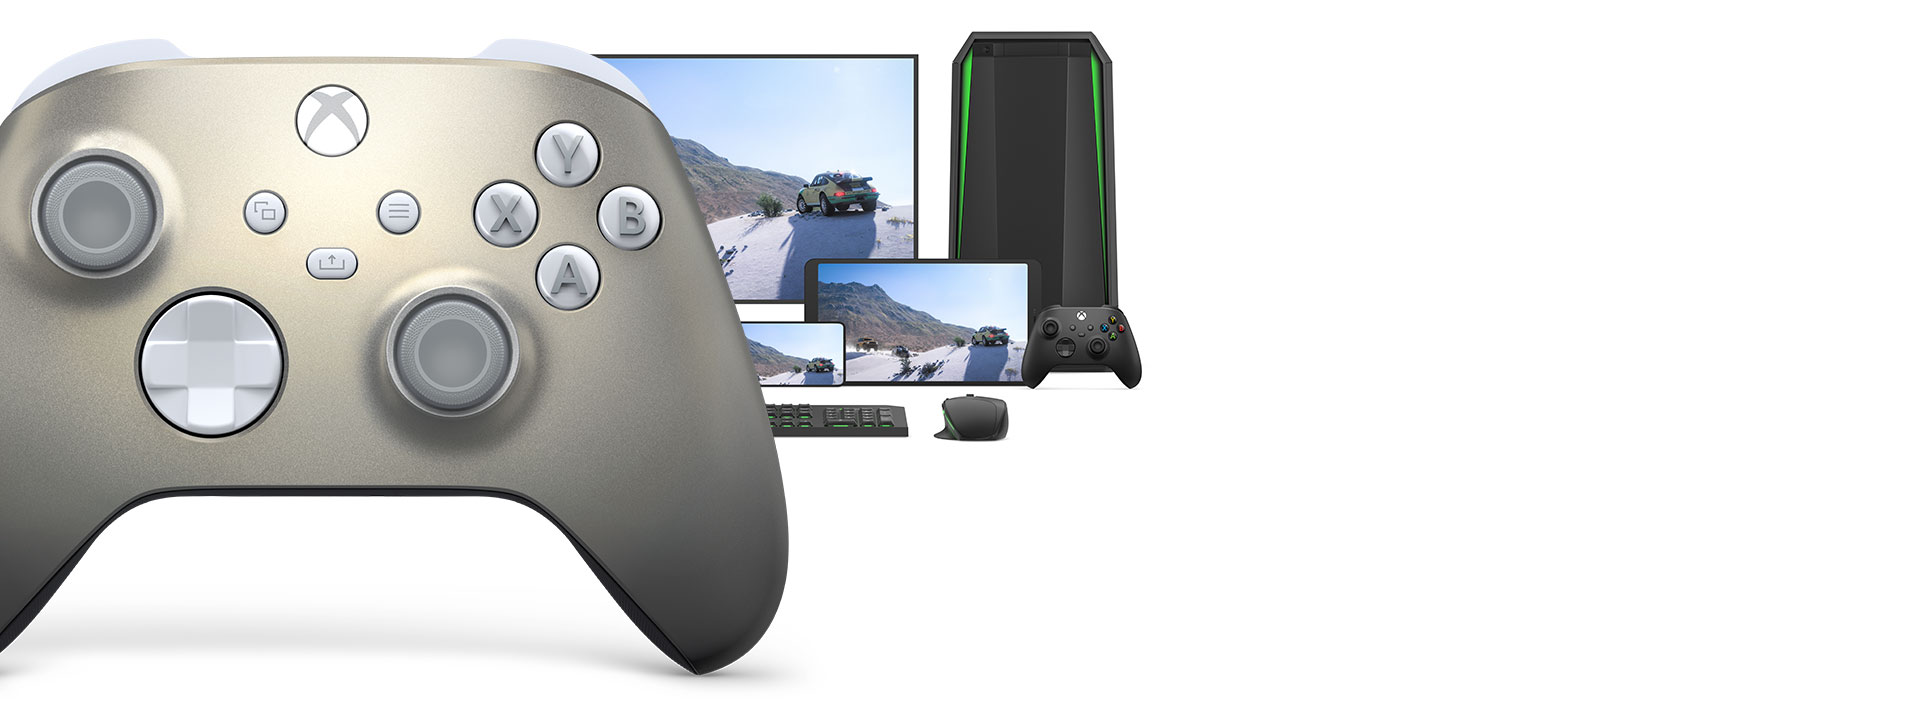 Xbox Wireless Controller - Lunar Shift Special Edition with a computer, TV and an Xbox Series S